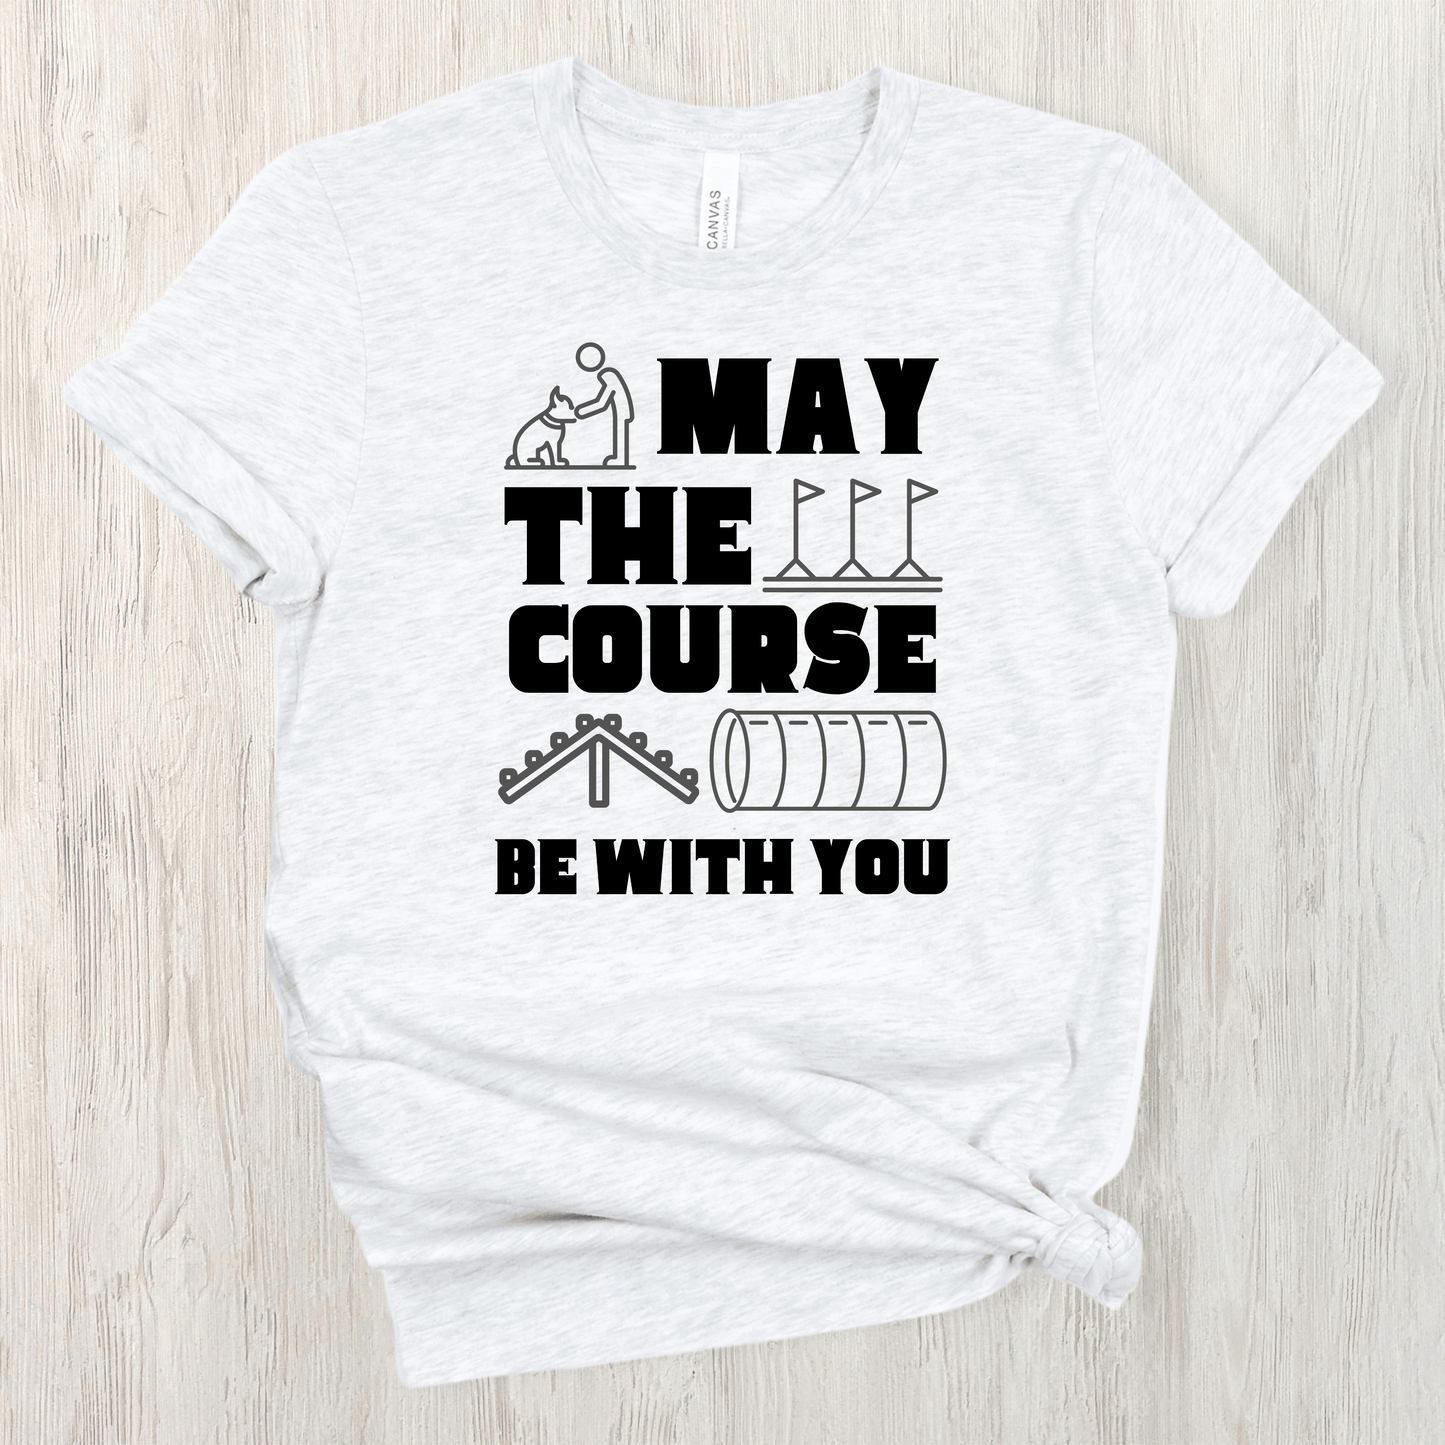 Ash tee featuring the text "May The Force Be With You" as well as agility related images.